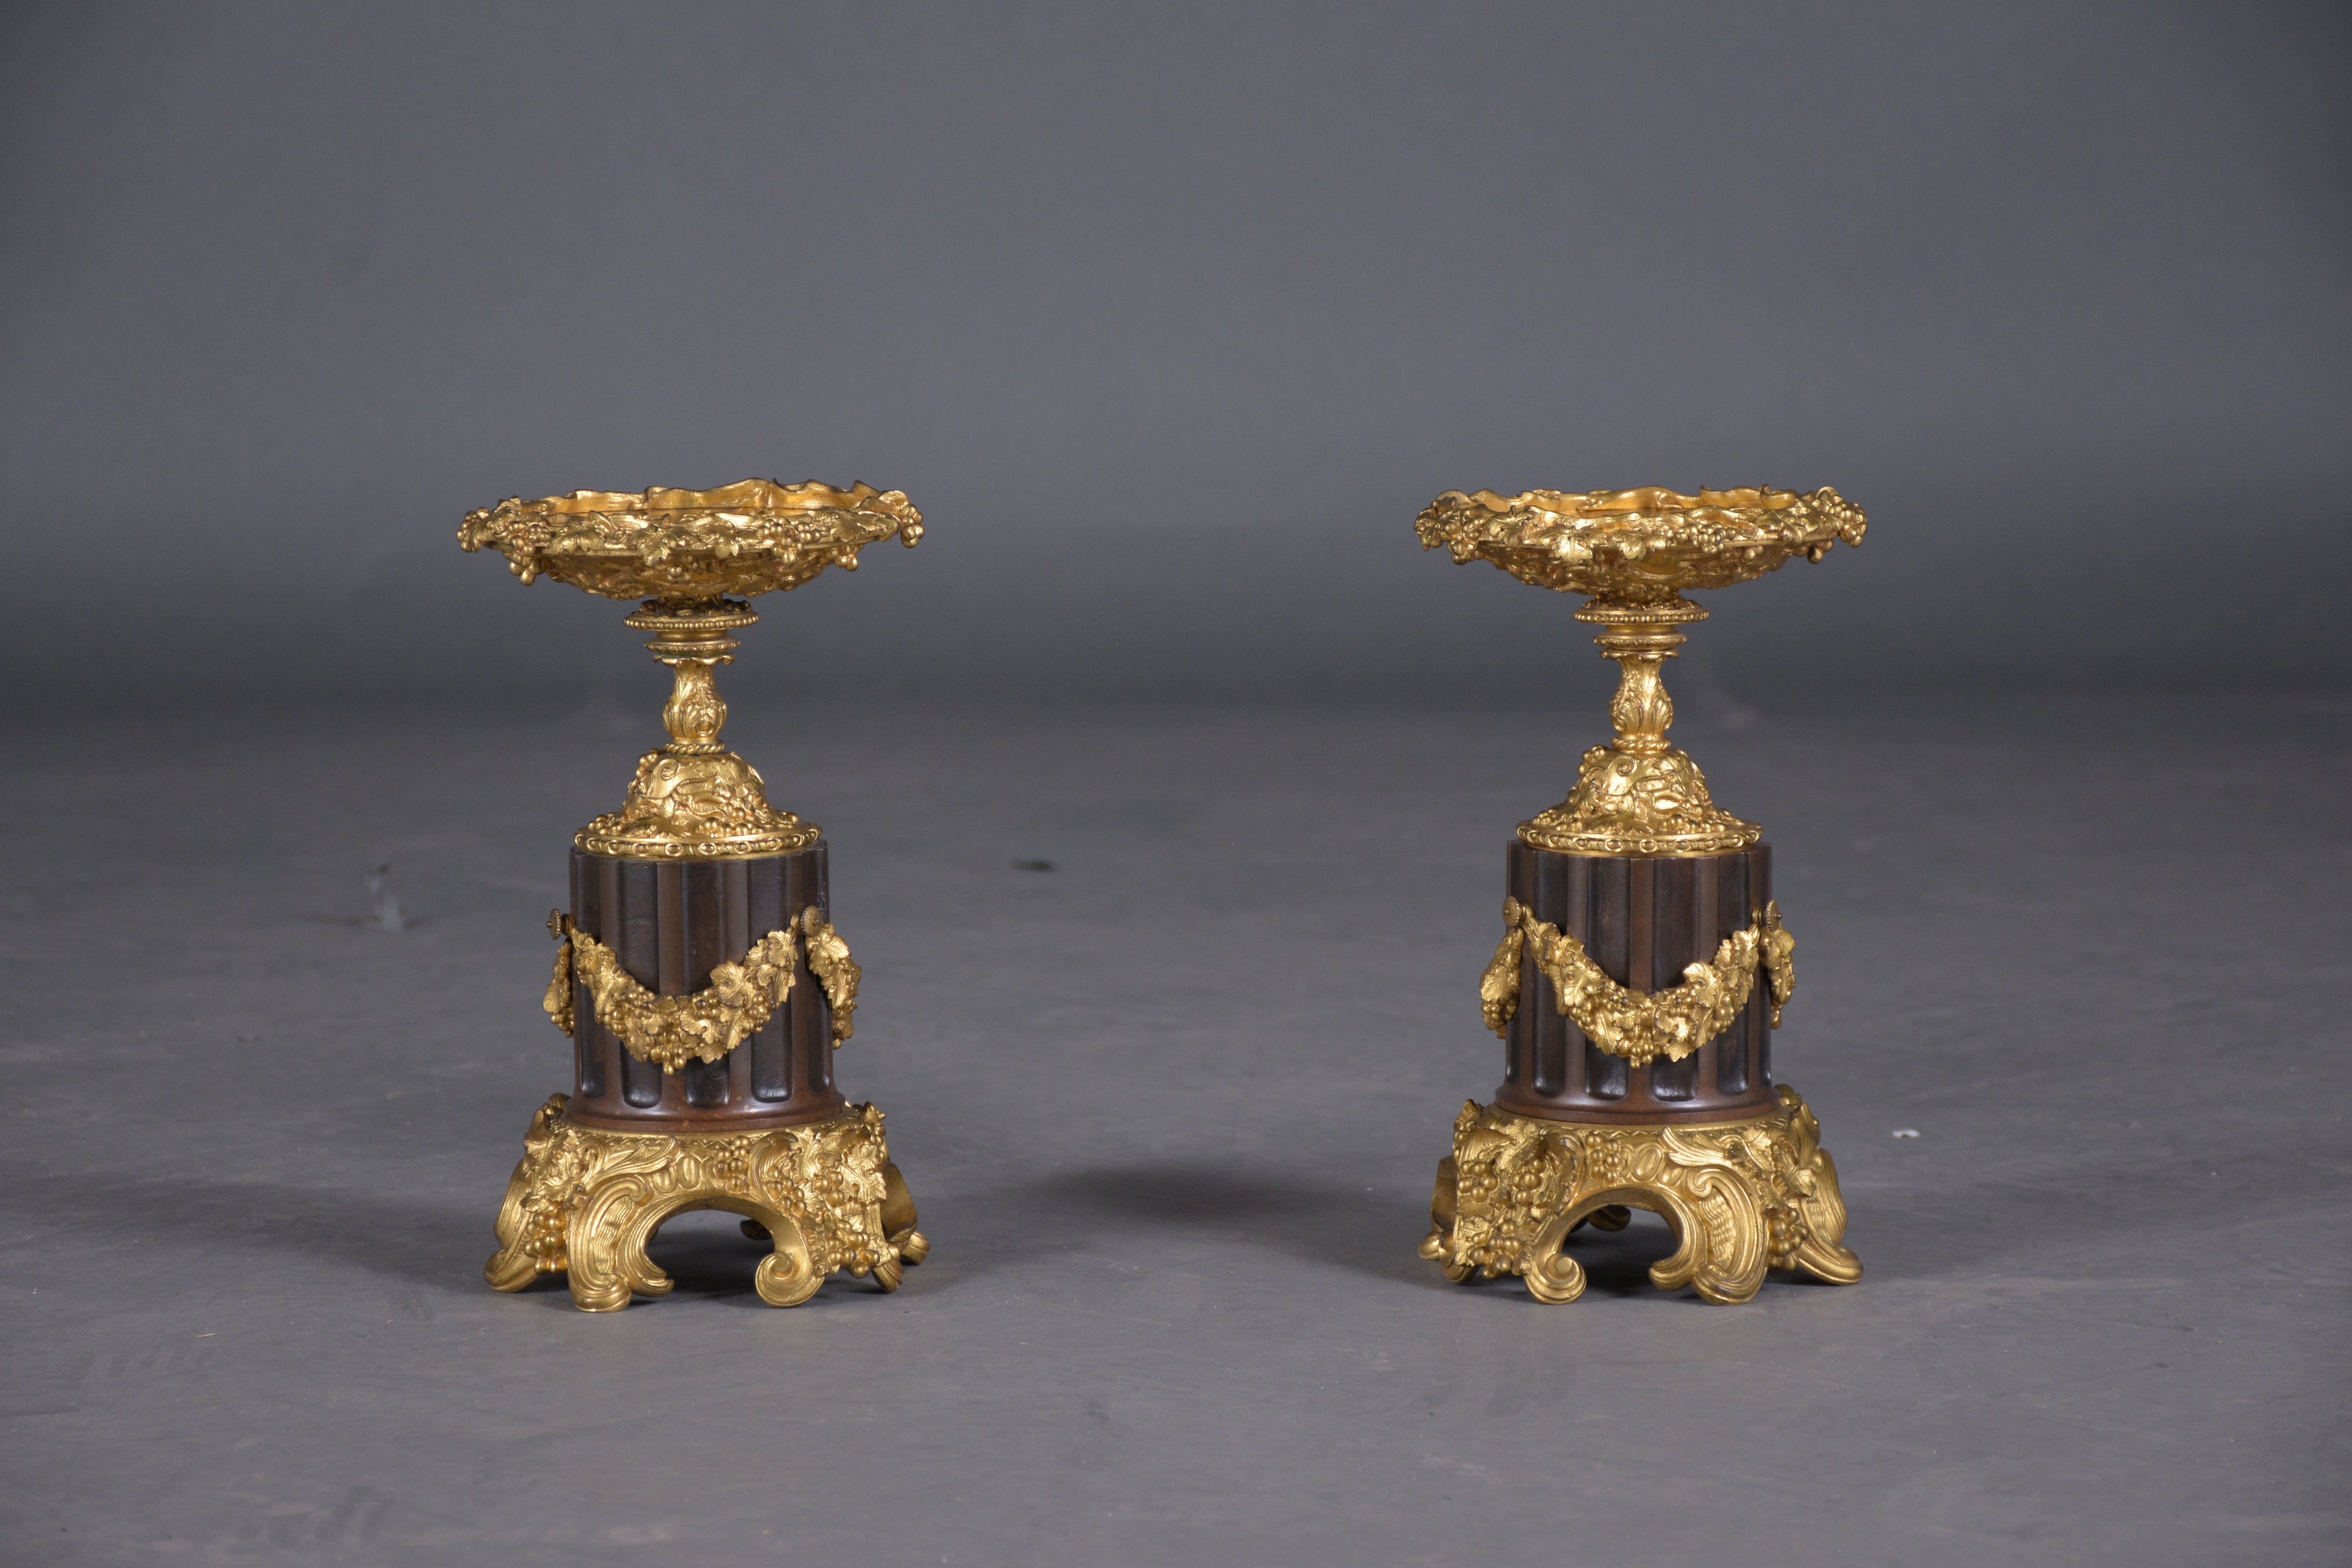 Empire Elegant 19th-Century French Bronzed Urns with Gold Ormolu Details